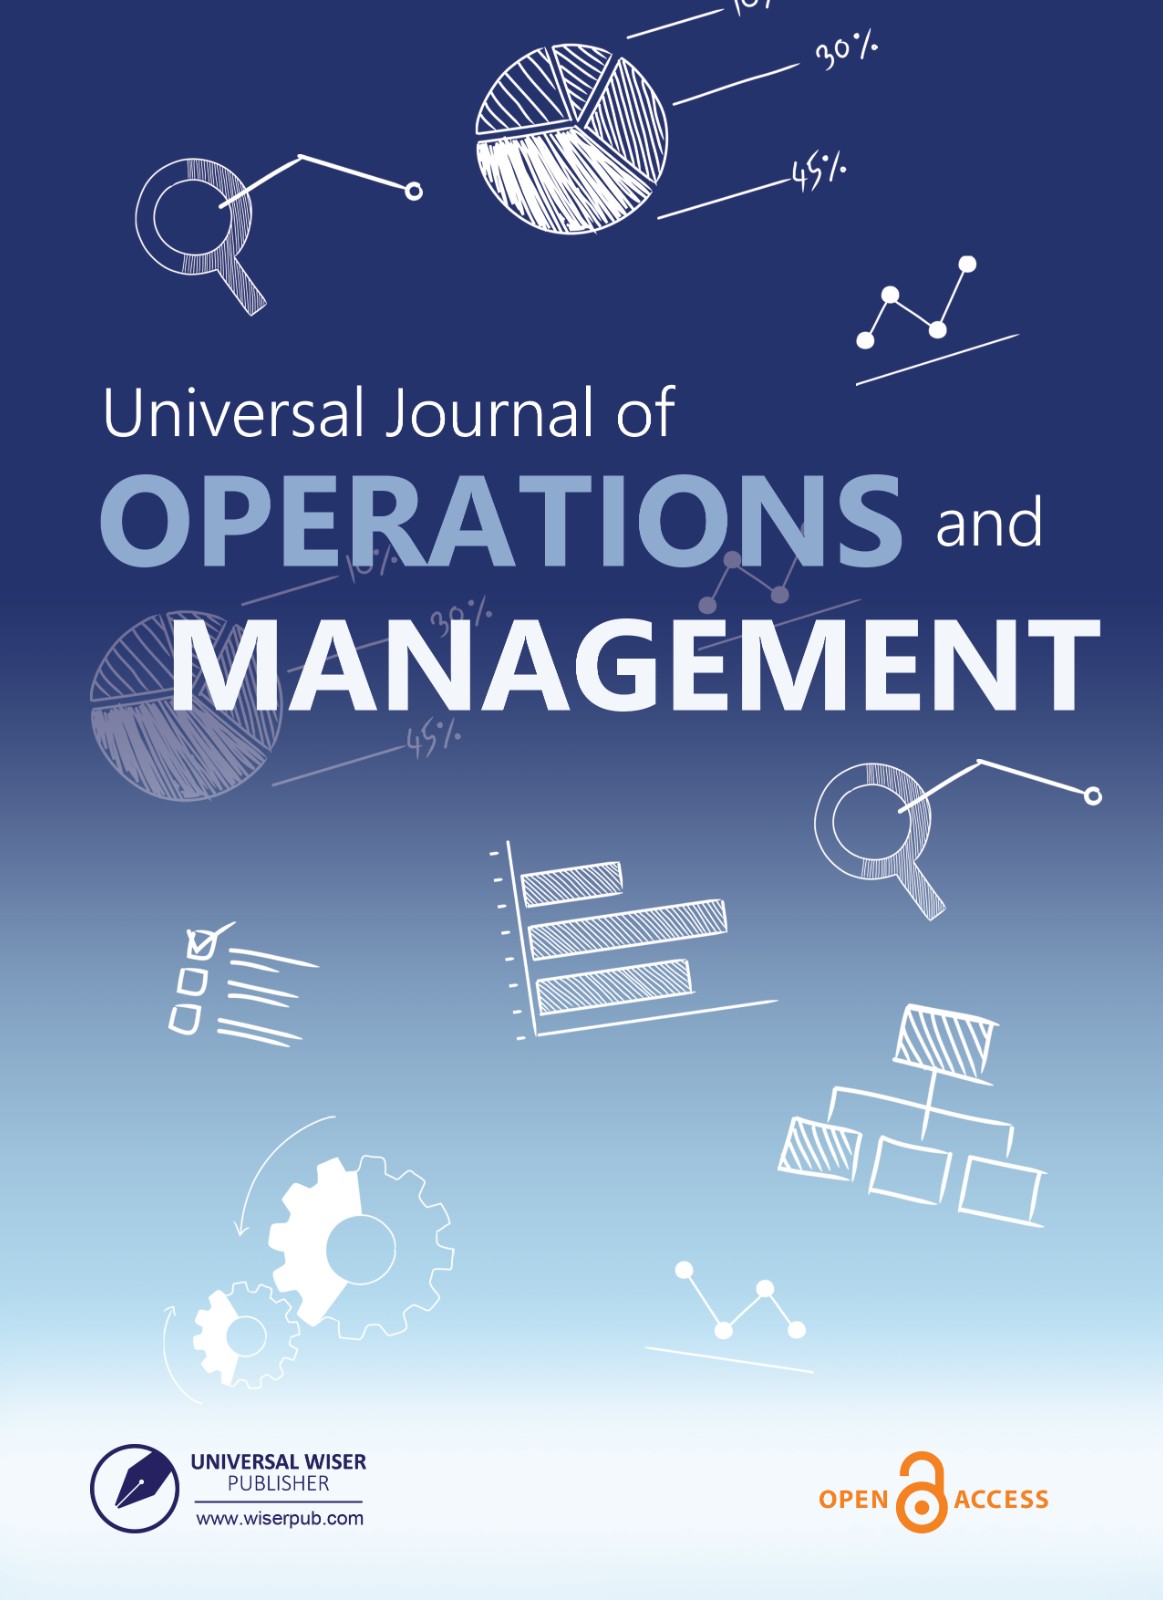 Universal Journal of Operations and Management